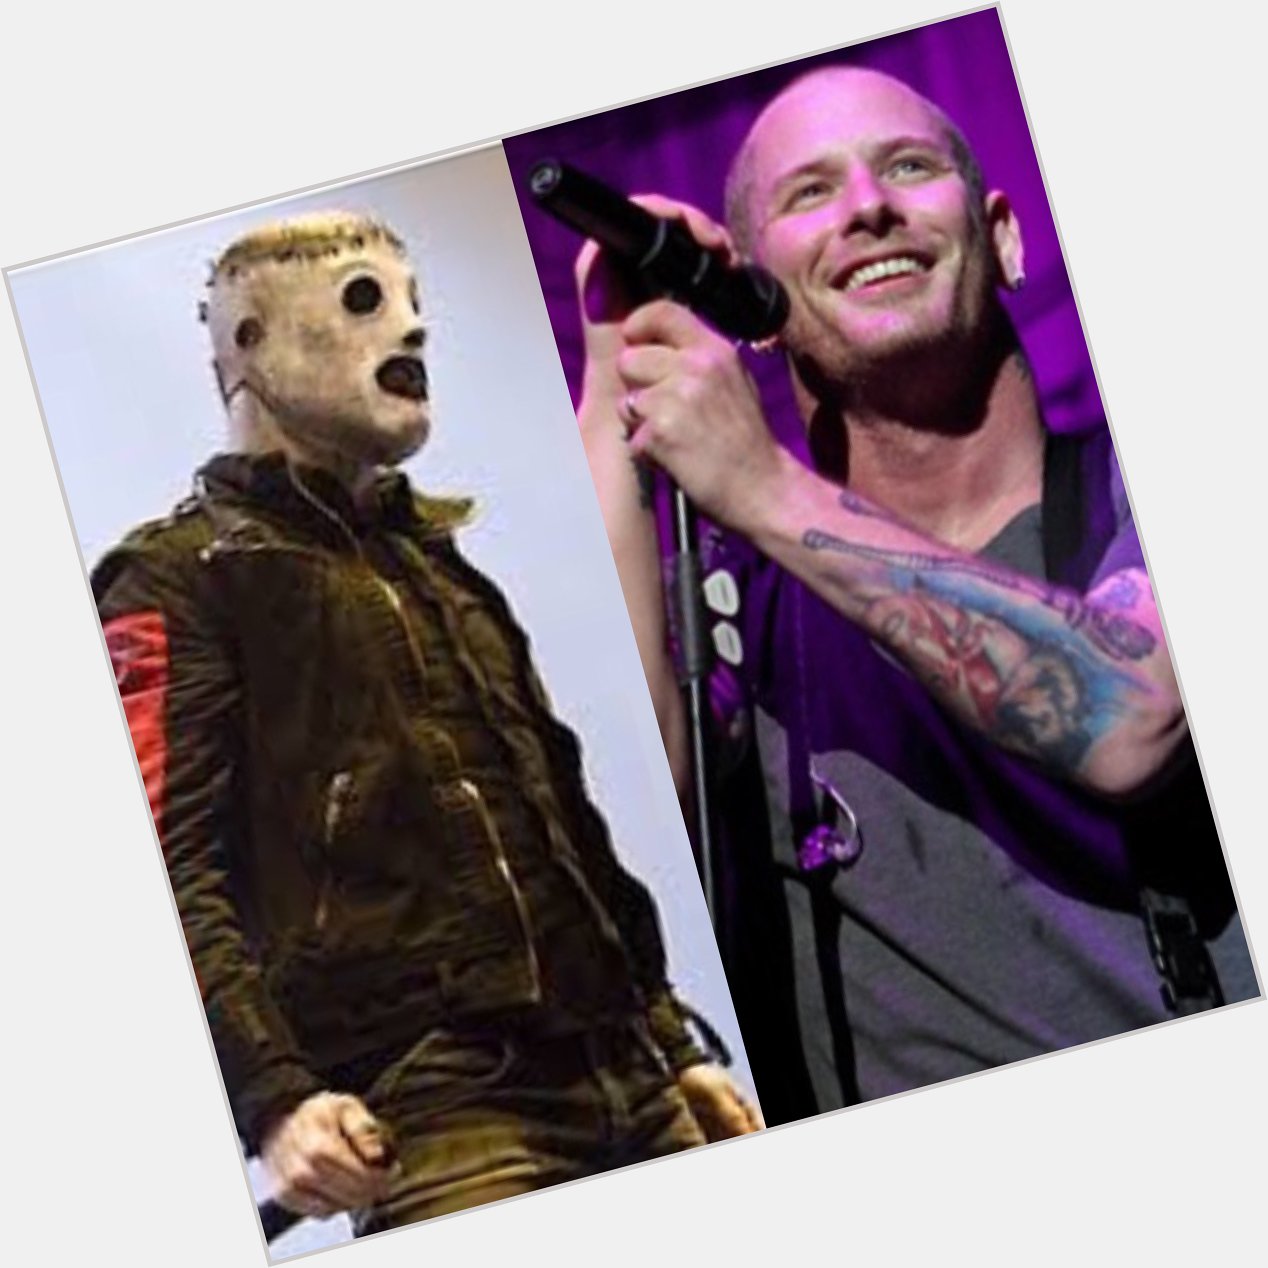 Happy Birthday to Mr Corey Taylor, I hope you have a wonderful day!          